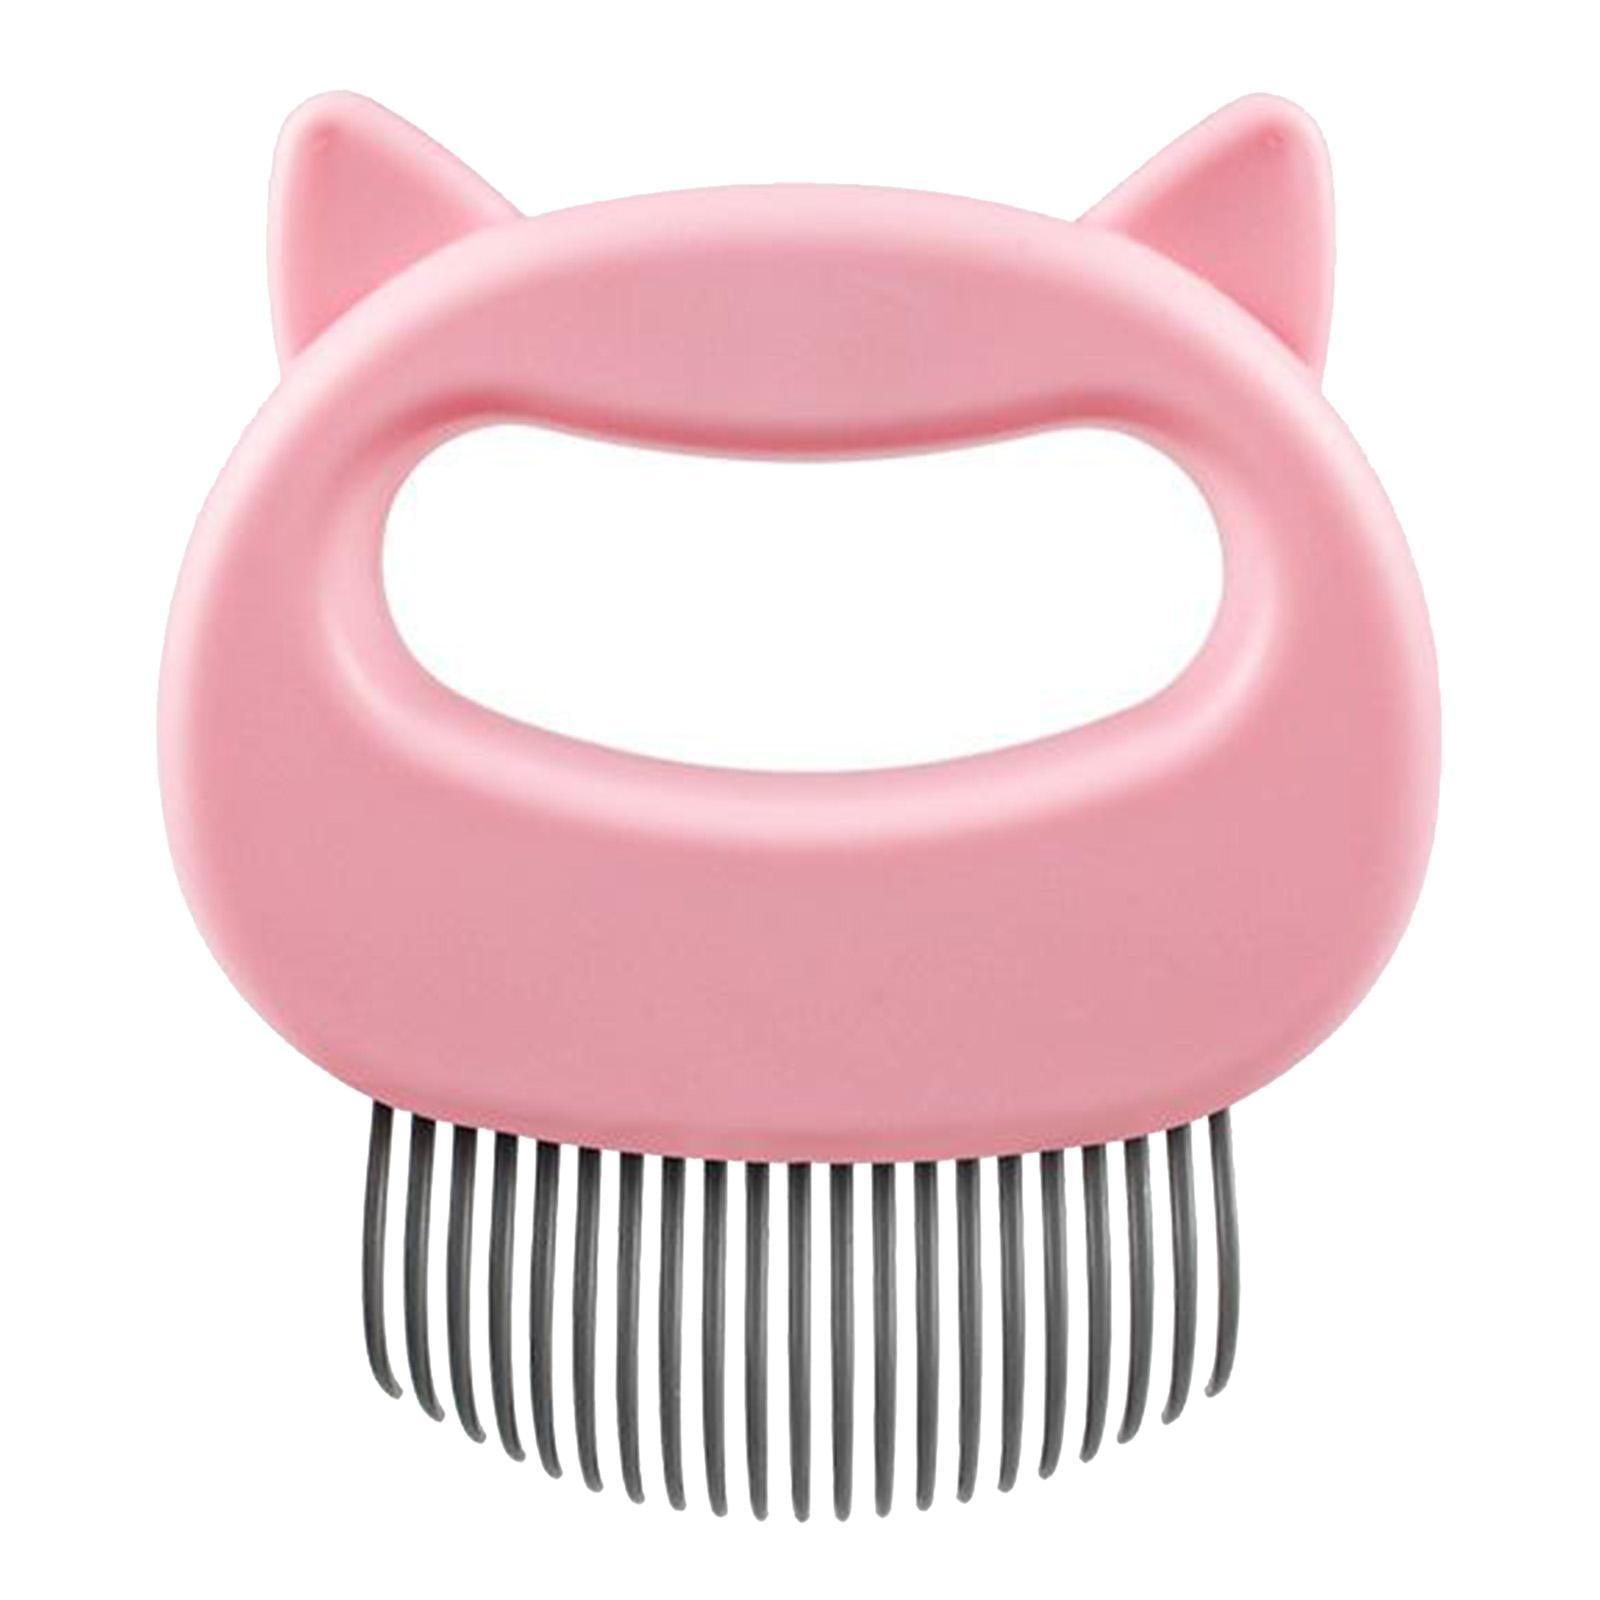 Pet Grooming Shedding Brush for Dog Cat Hair Pet Comb Safe and Gentle Plastic Claw Teeth for Removing Matted Fur Knots and Tangles 